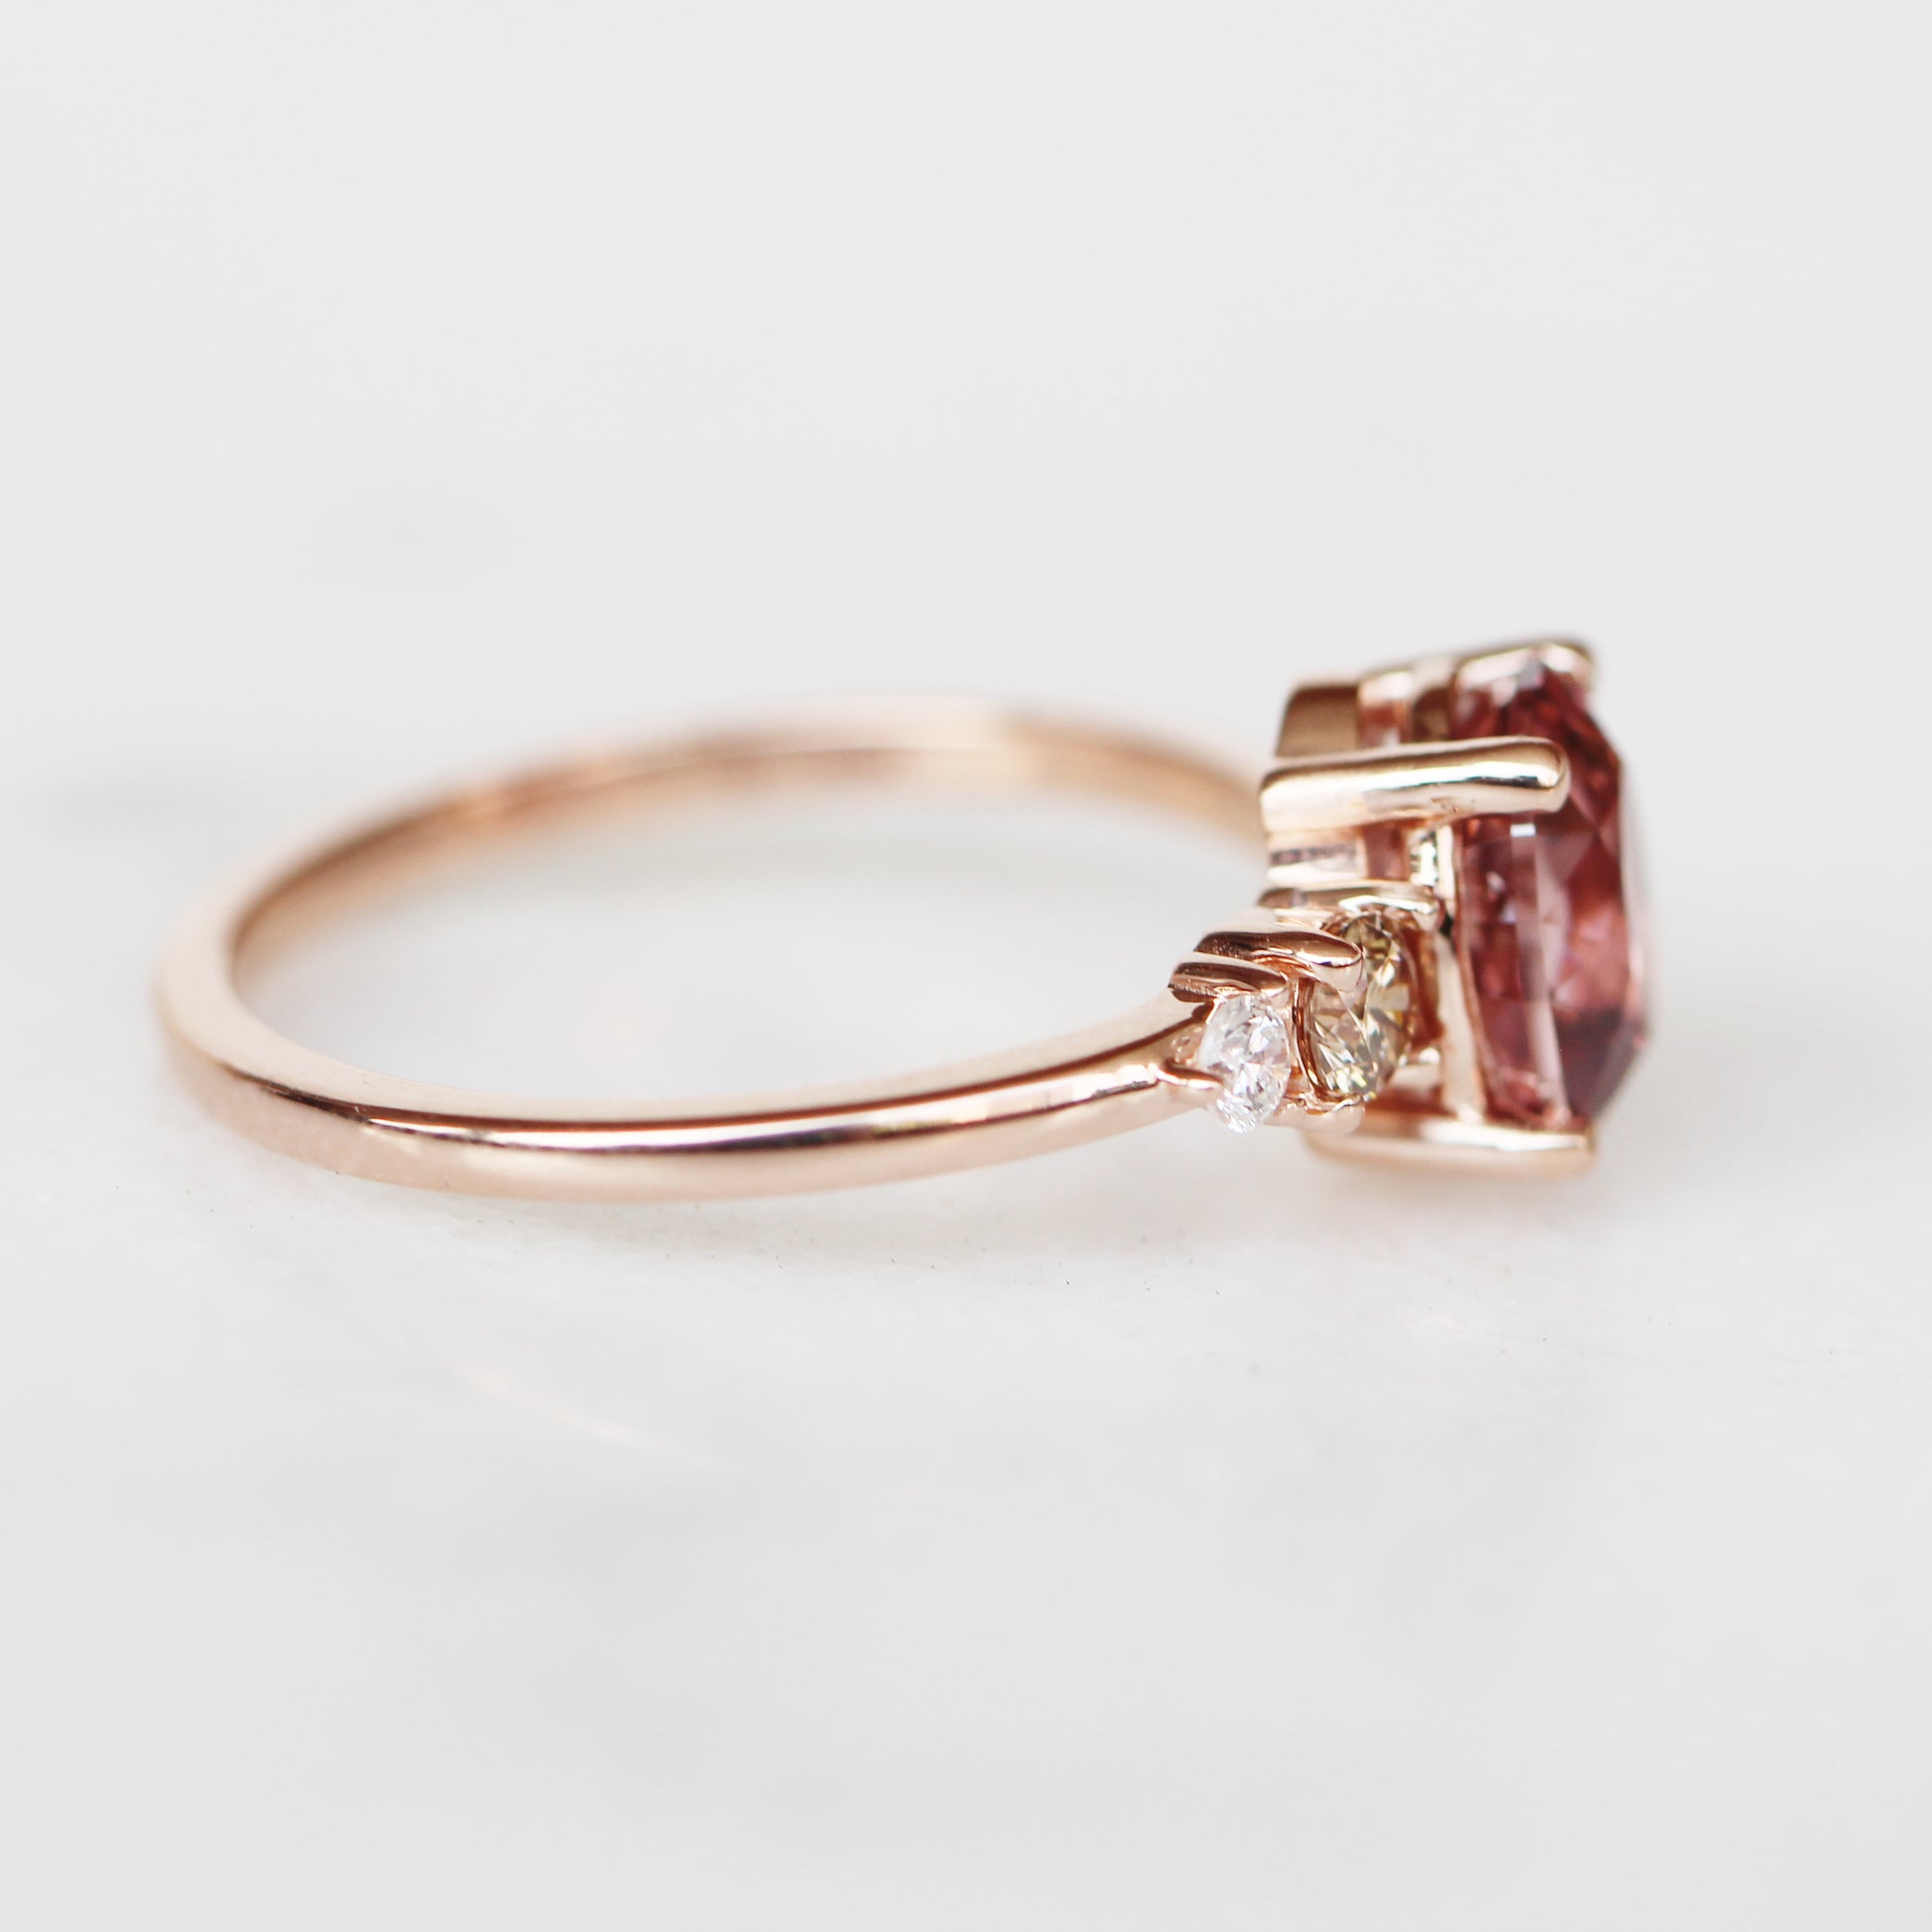 Jesse Ring with 2.04 ct Zircon and Diamonds in 10k rose gold - ready to size and ship - Midwinter Co. Alternative Bridal Rings and Modern Fine Jewelry